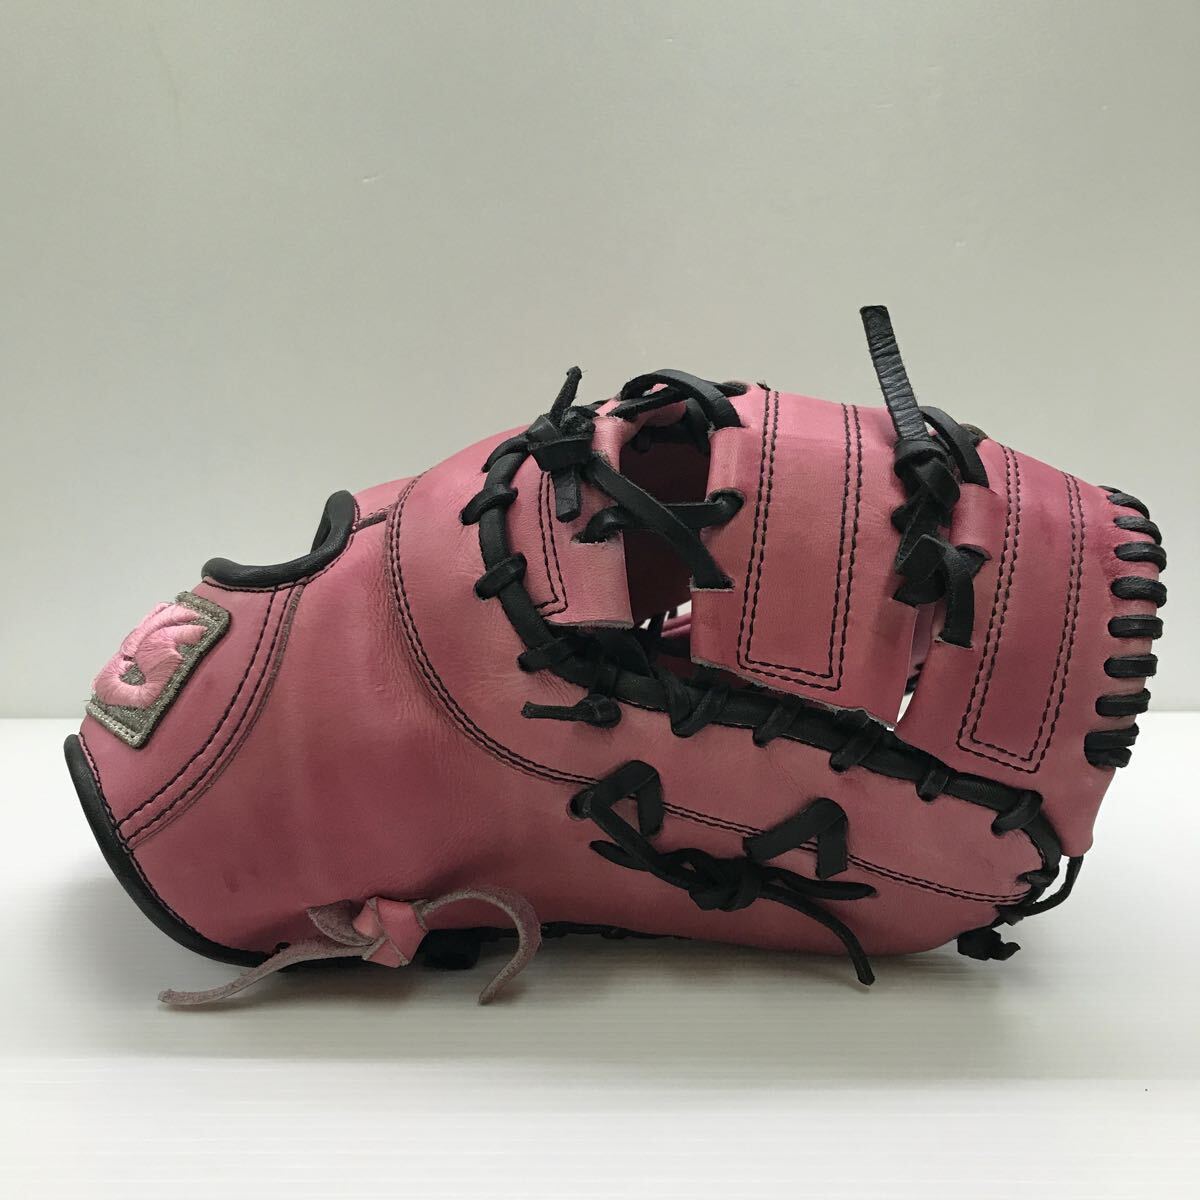 G-1276 ho ta sport HOTTA SPORTS softball type for first baseman First mito glove glove baseball secondhand goods embroidery entering 